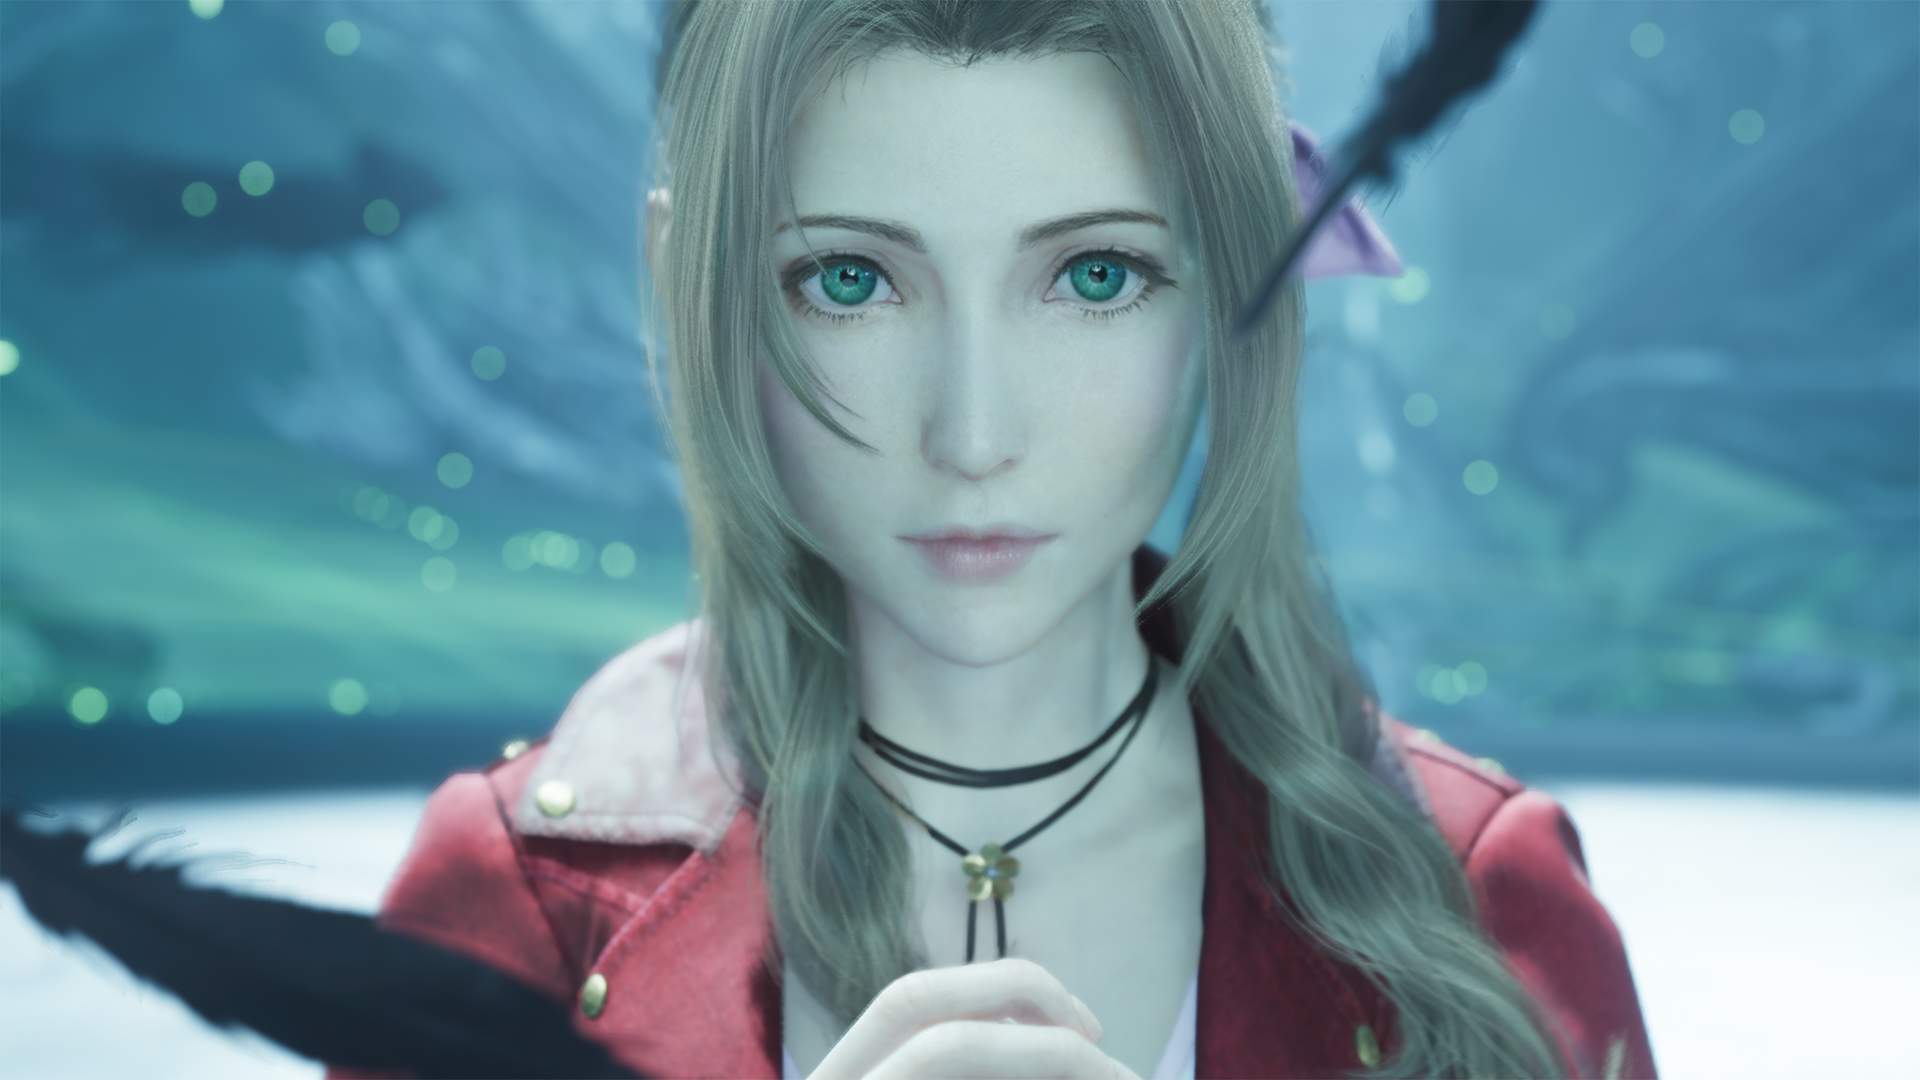 Aerith looking into the camera, while black feathers fall around her